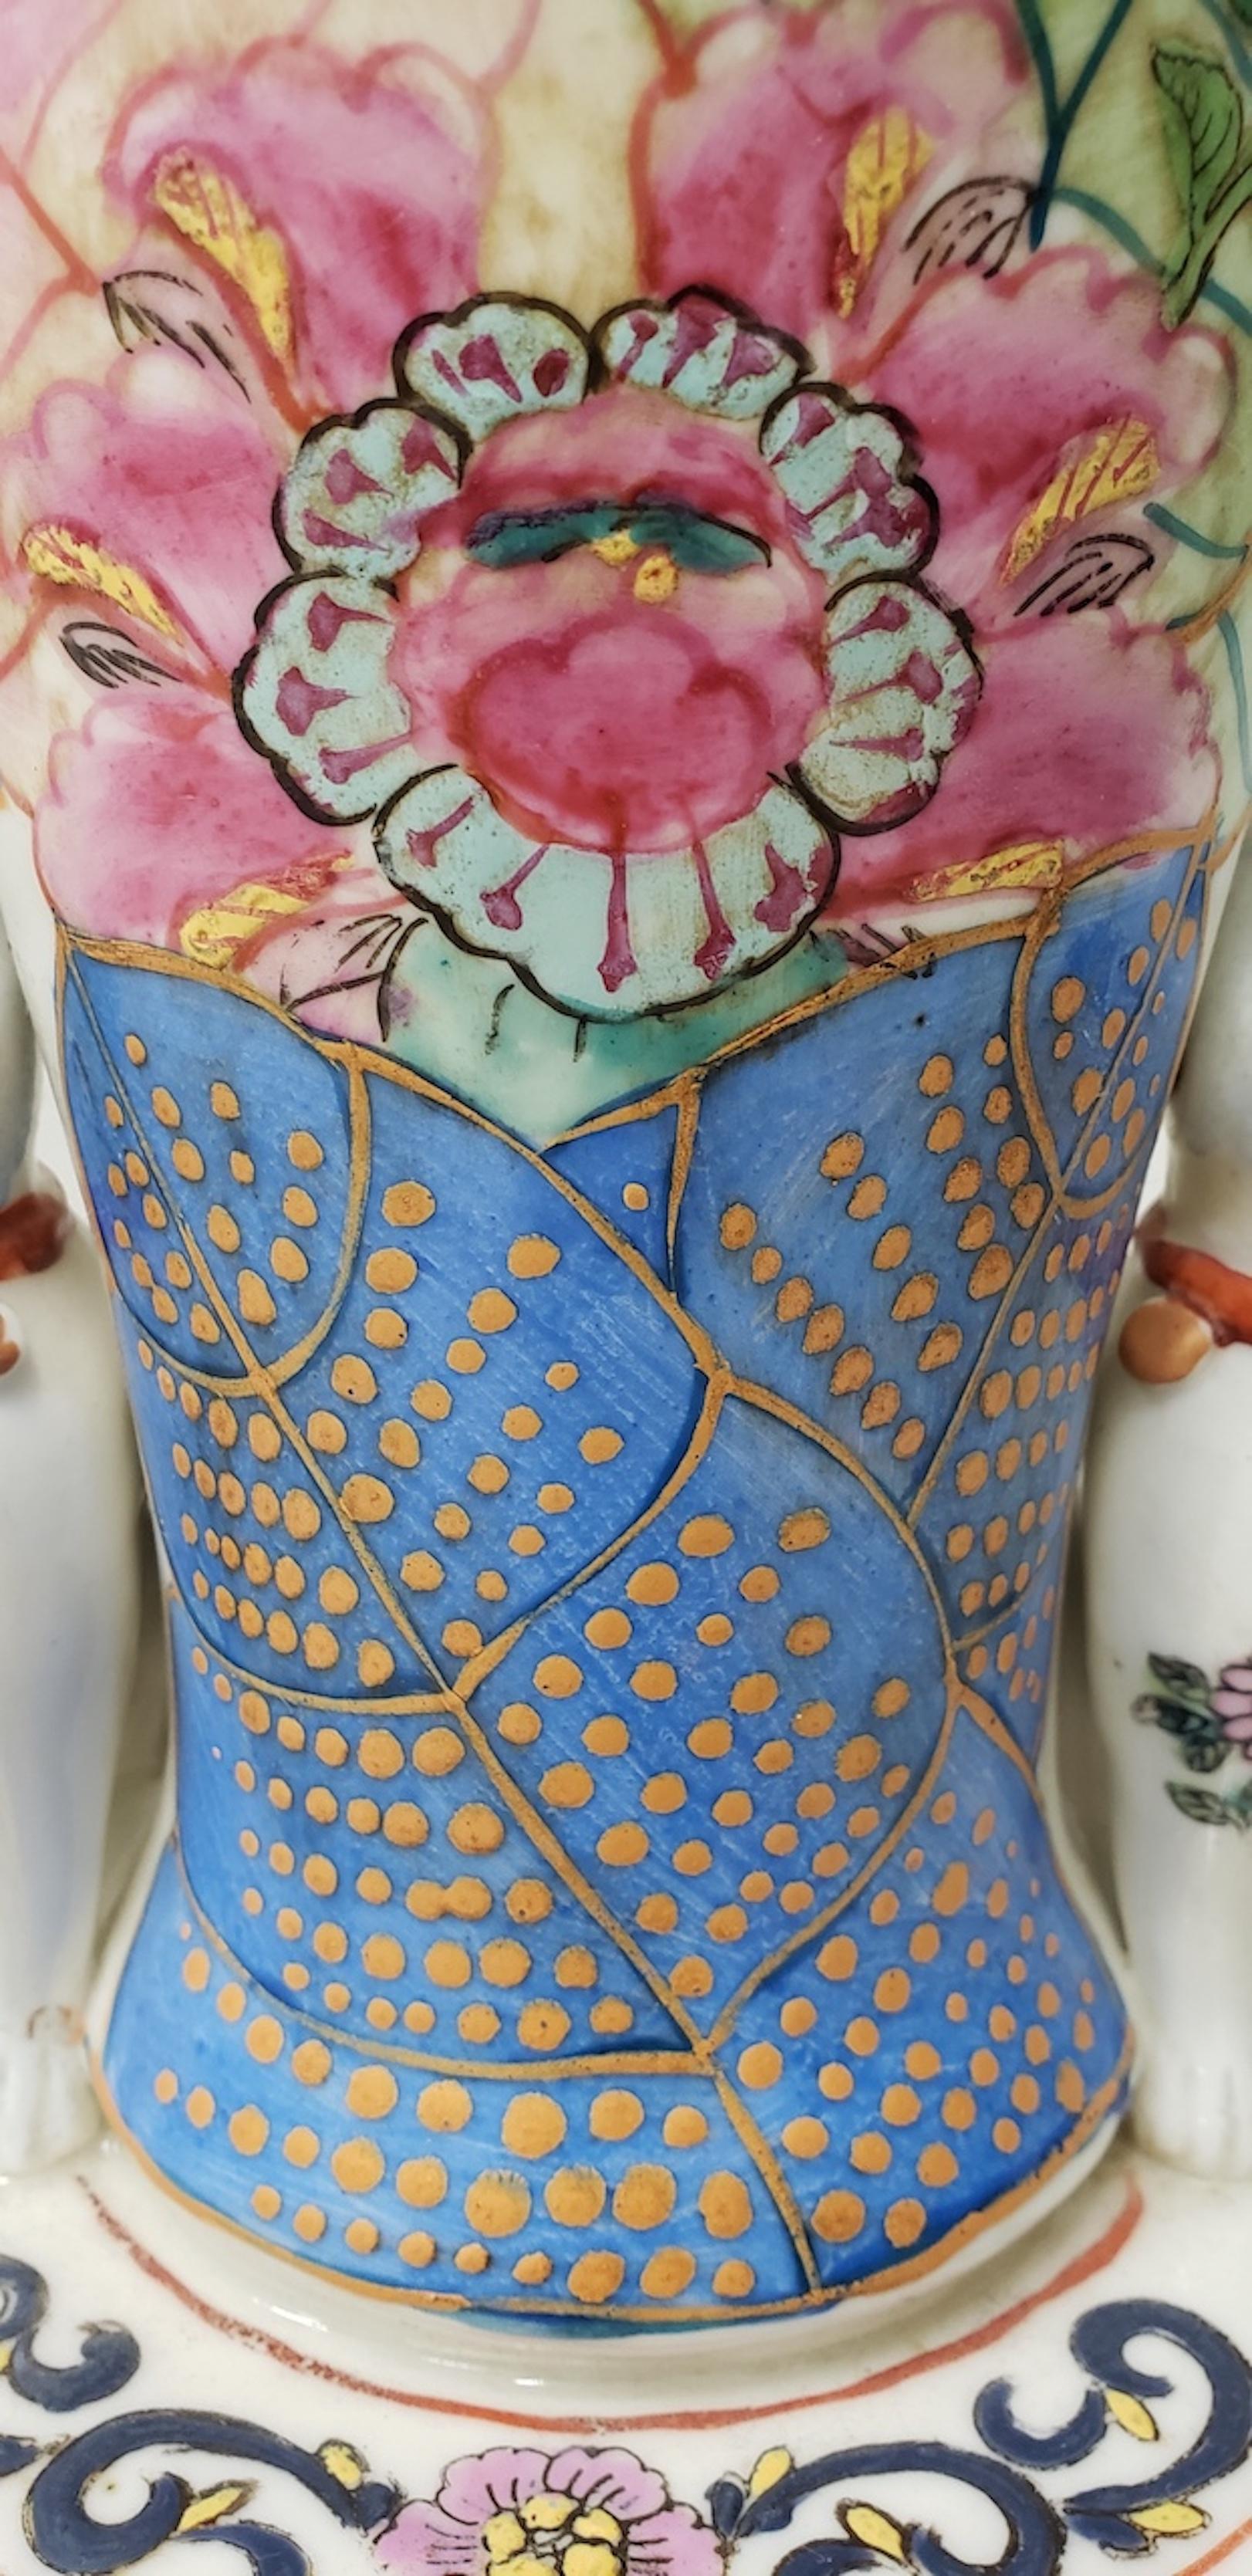 Hand-Crafted Pair of Early to Mid-20th Century Chinese Porcelain Figurines with Cats